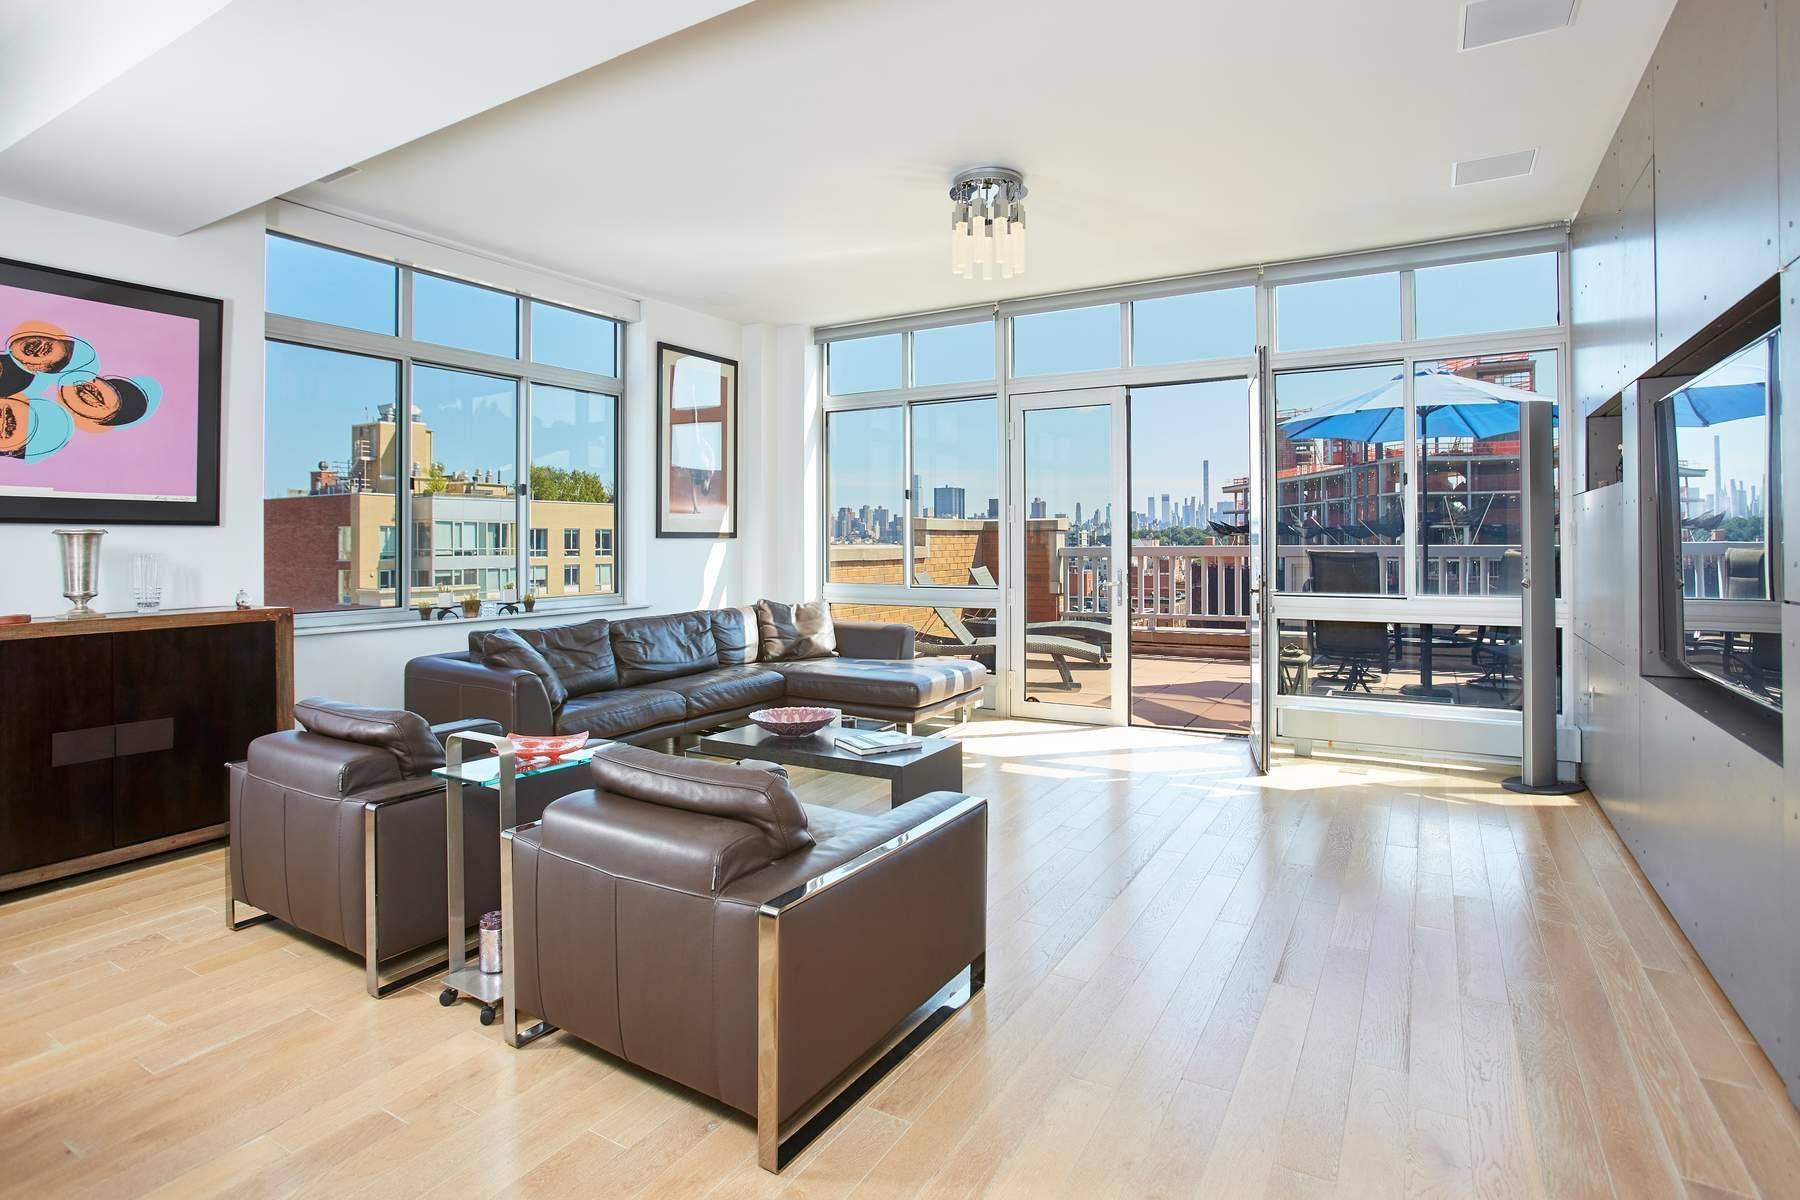 This stunning Penthouse with terrace and expansive views offers the perfect setting for spectacular entertaining !